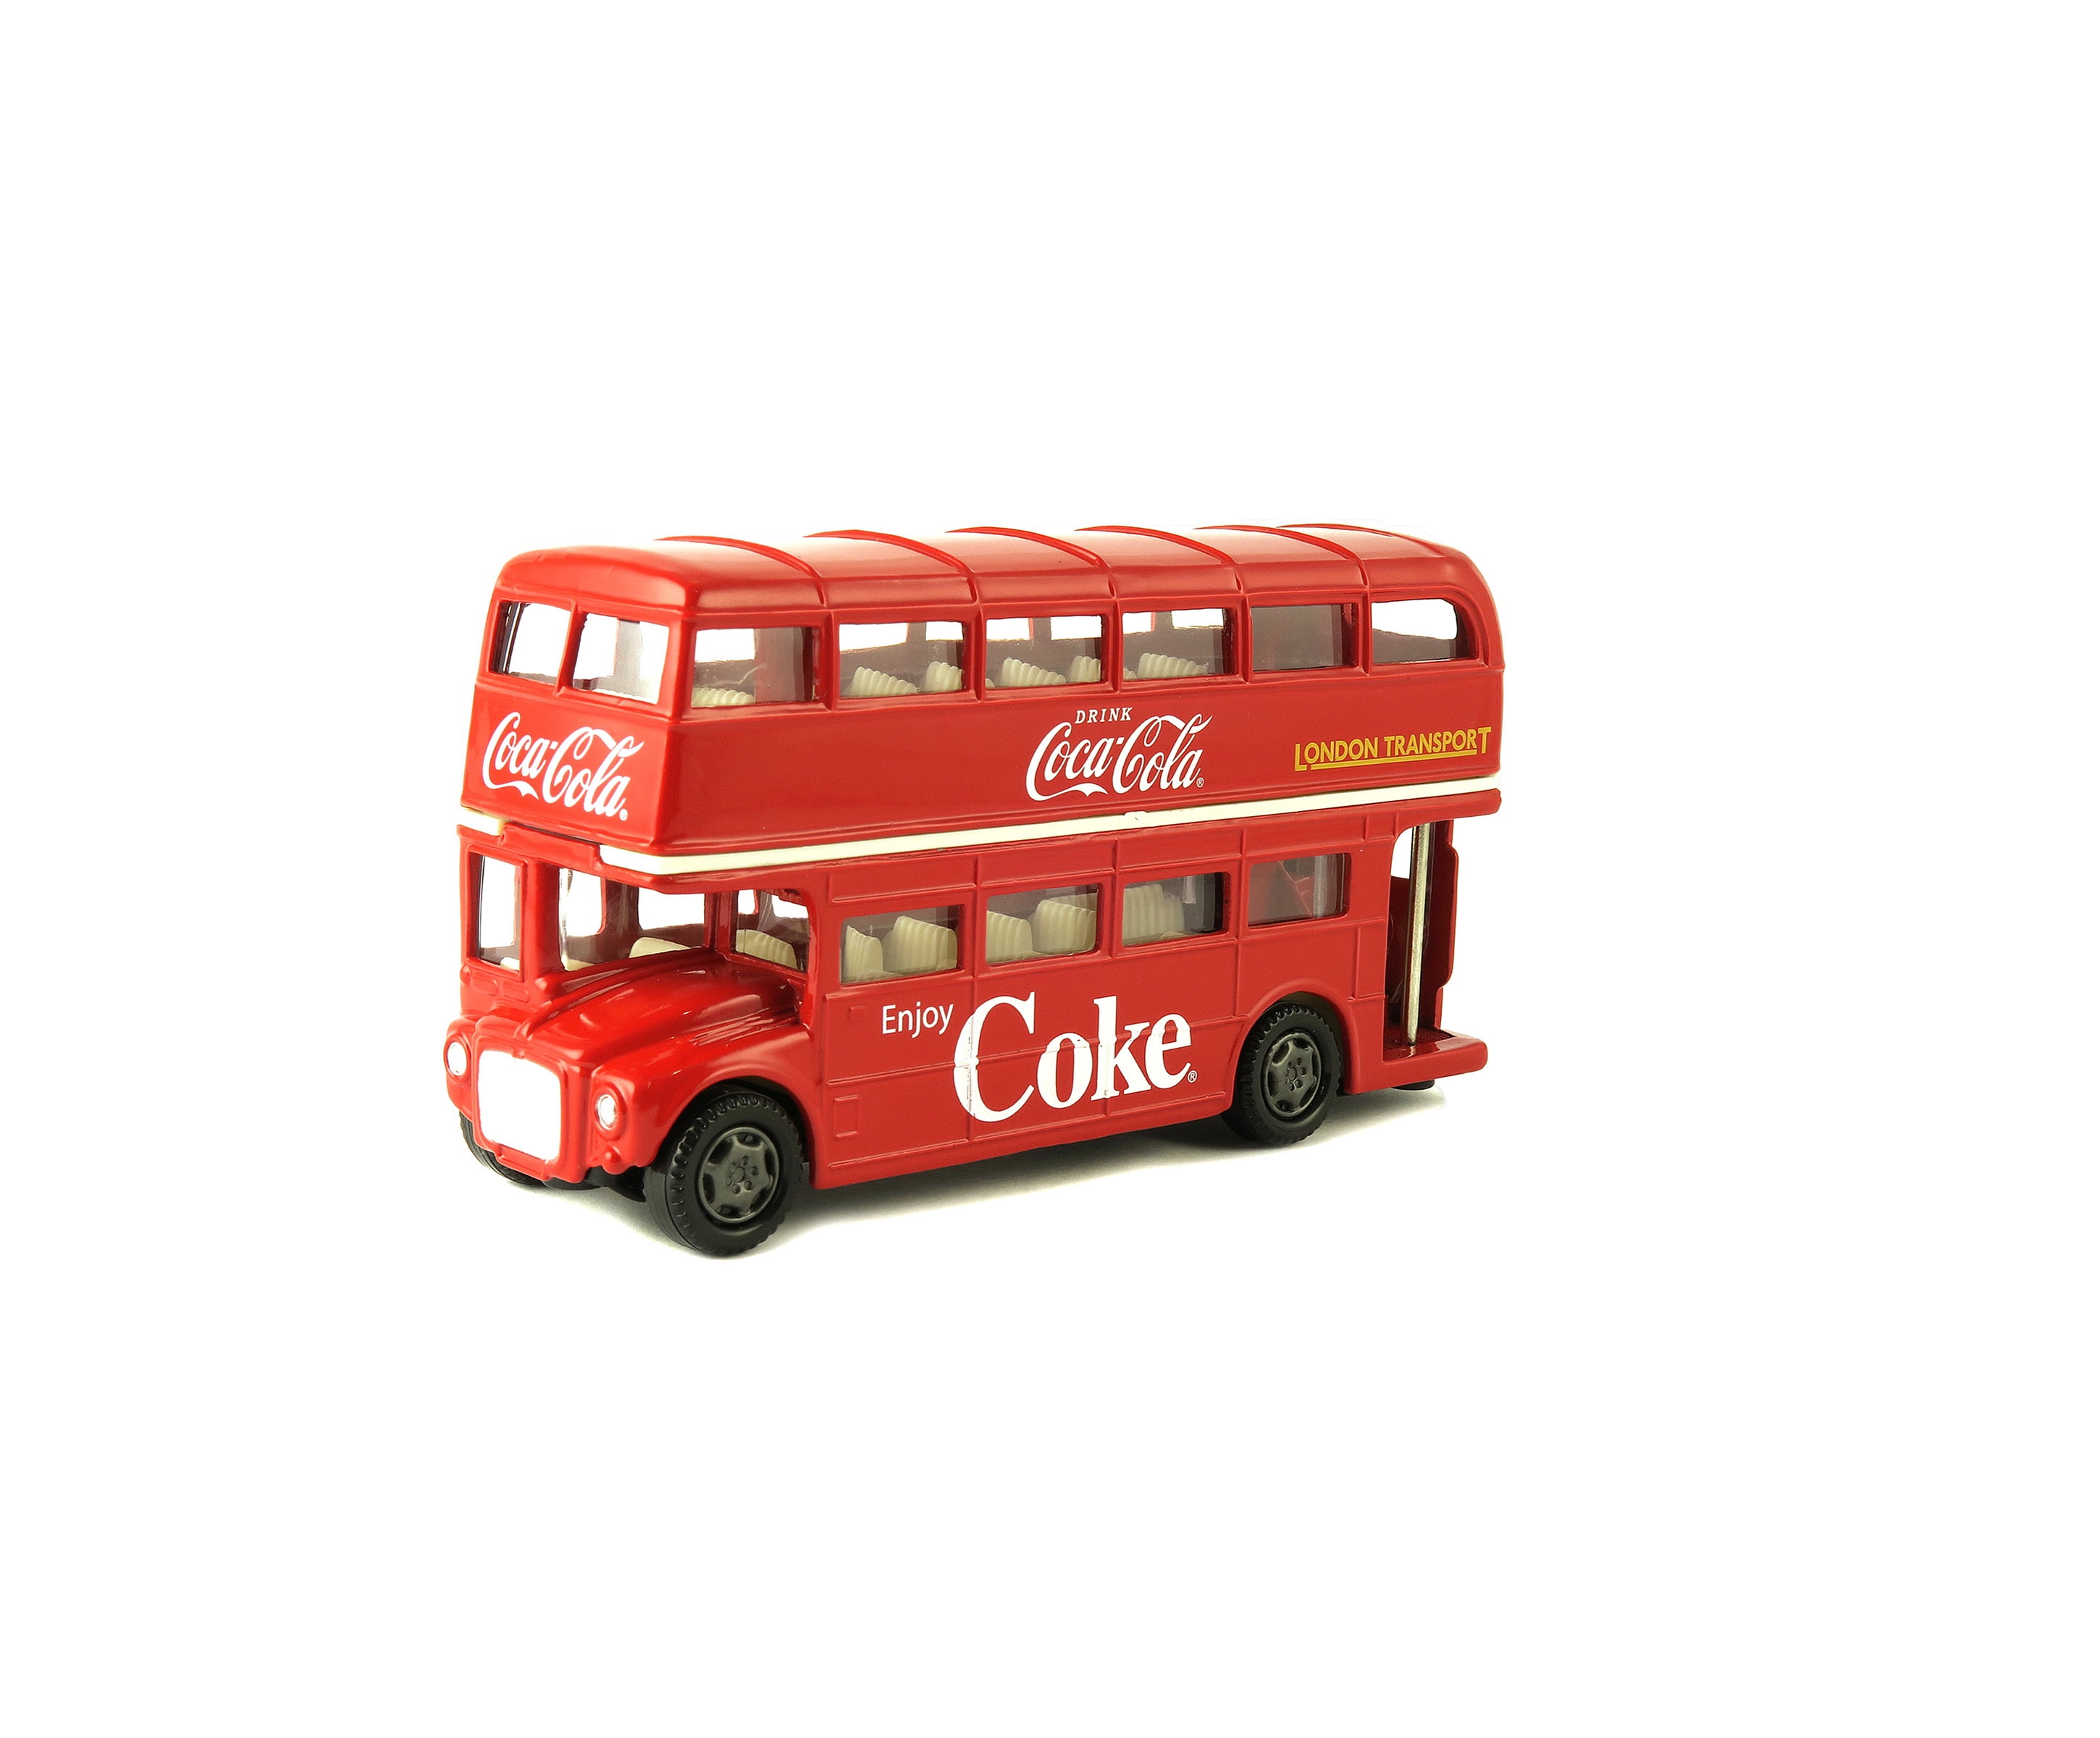 Motorcity Classics 464001 1 By 64 Diecast 1960 Routemaster London Double Decker Bus Coca-cola Model